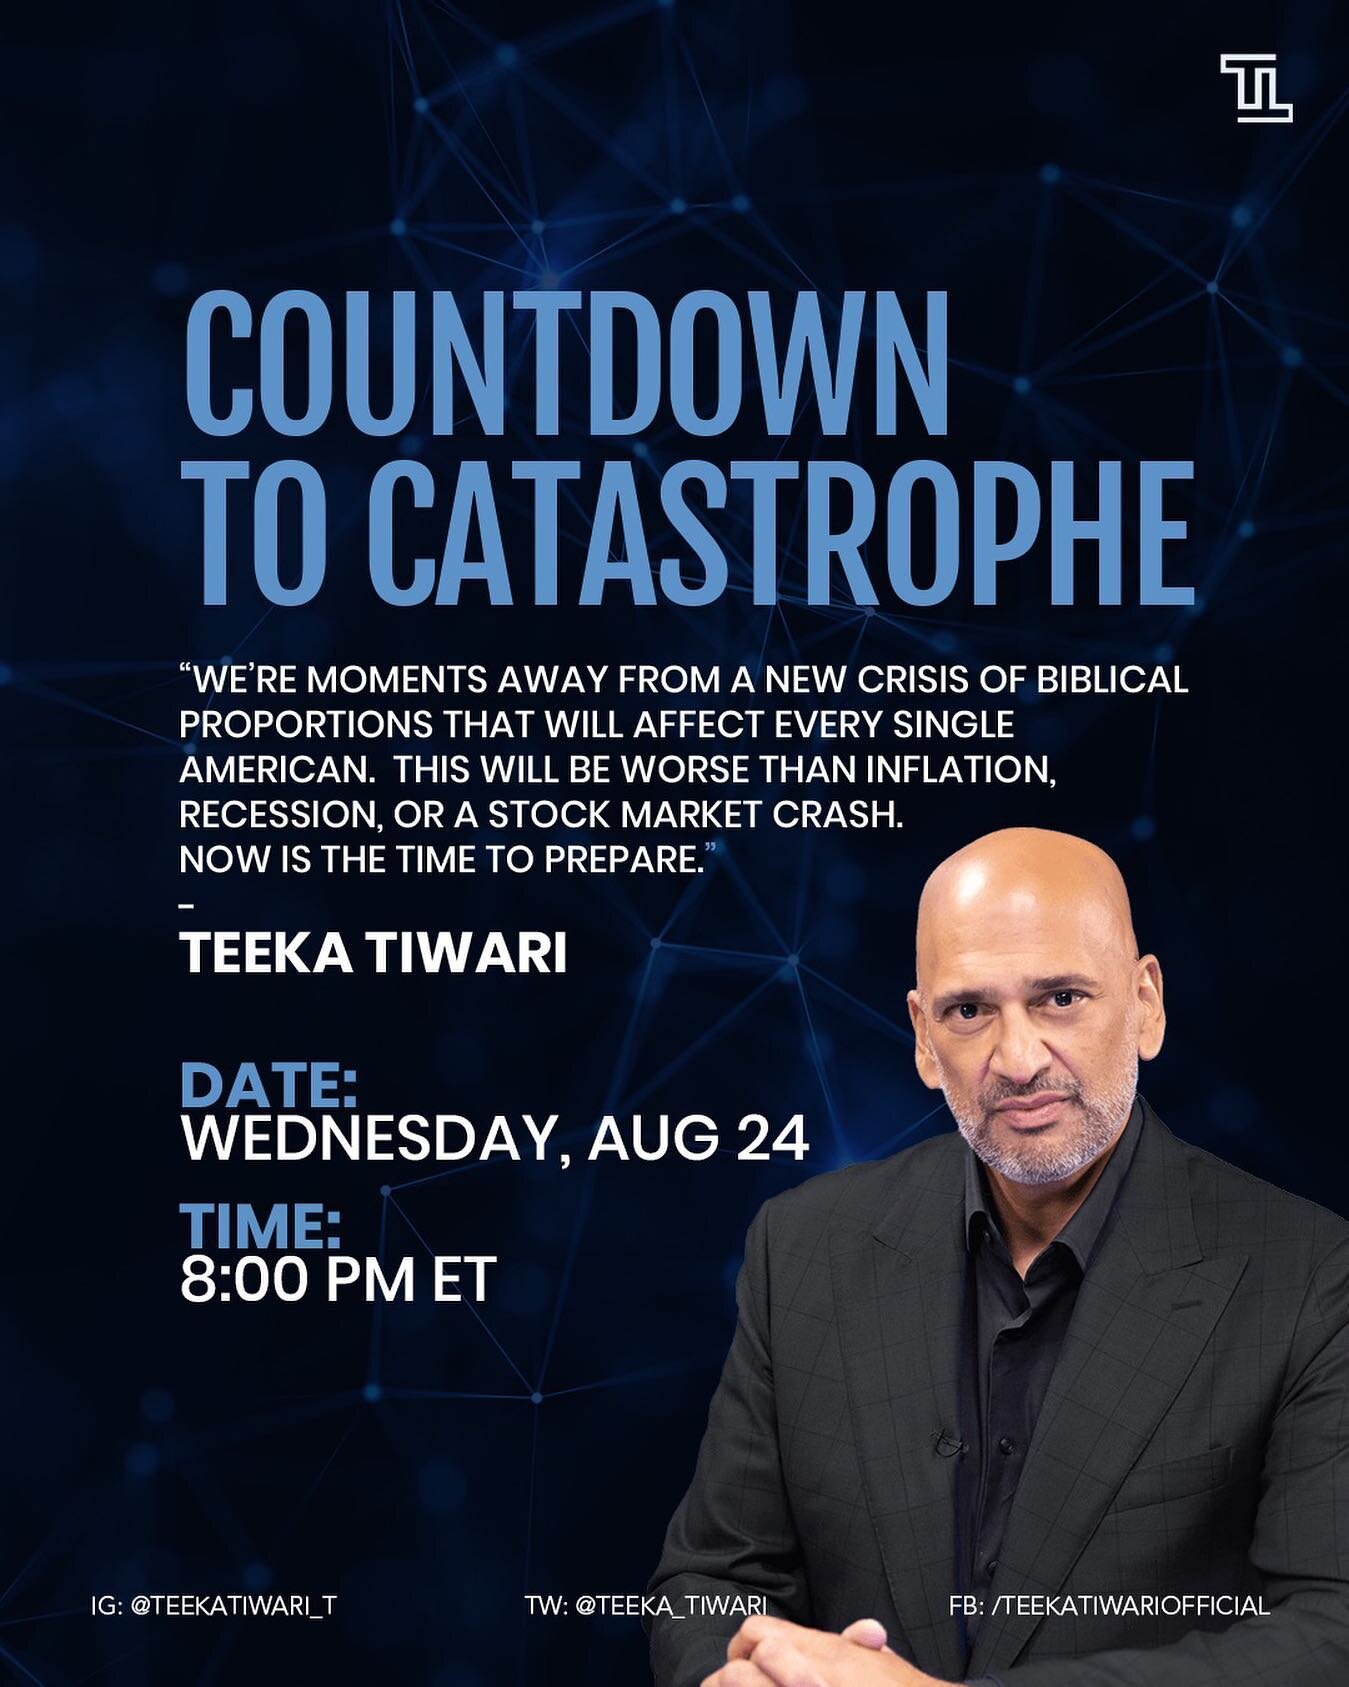 Mark your calendars.

We&rsquo;re moments away from a new crisis of biblical proportions that will affect every single American. This will be worse than inflation, recession, or a stock market crash. Now is the time to prepare.

Join me during this m